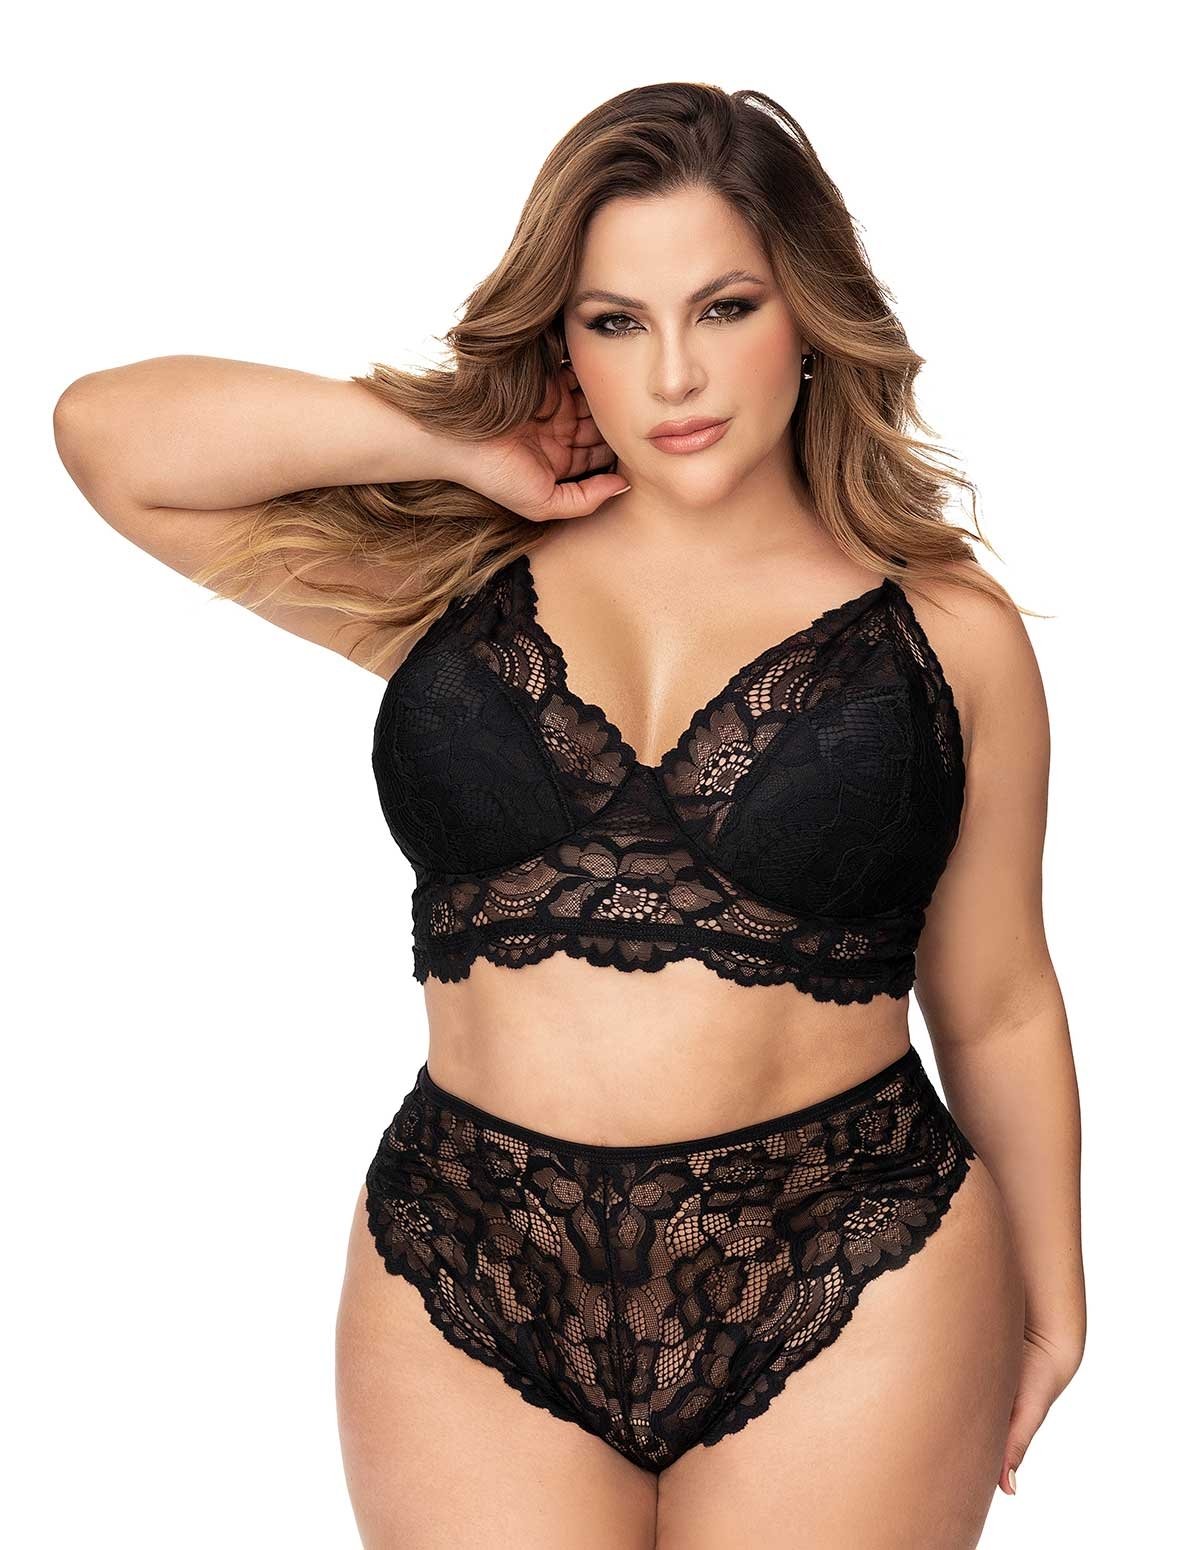 alternate image for Babe In Basics Plus Size Bra And High Waist Panty